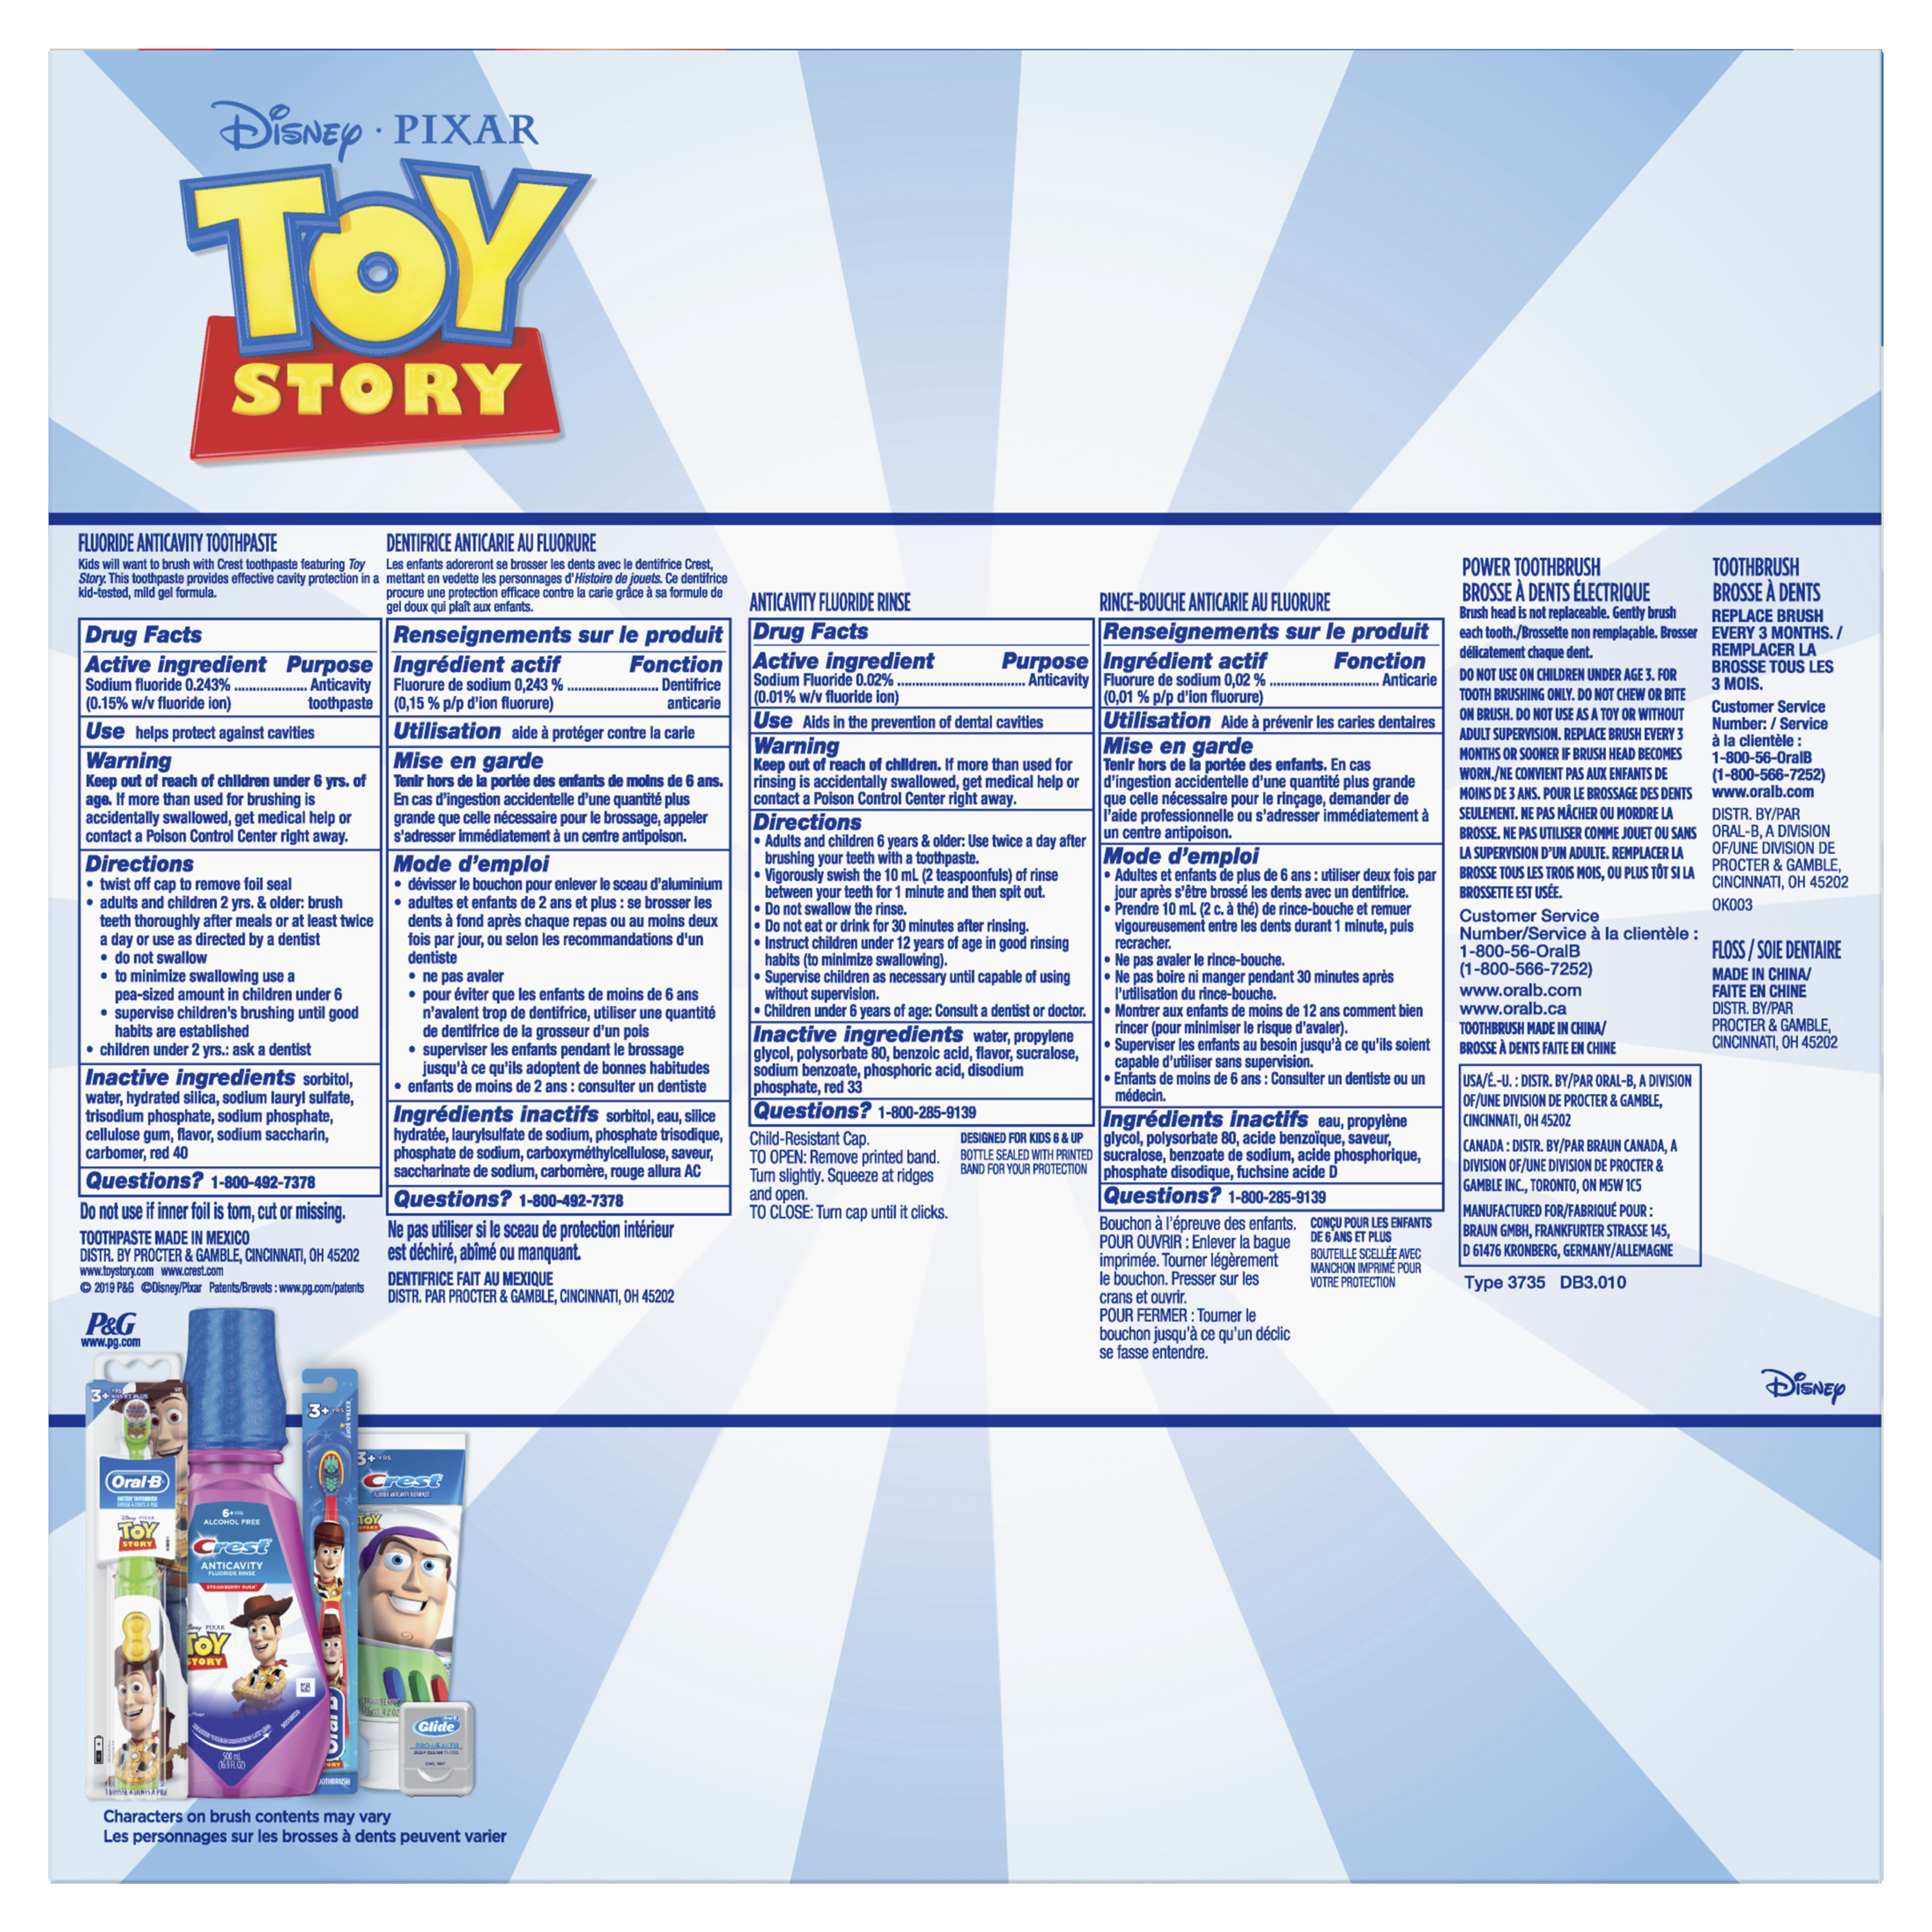 Crest & Oral-B Kids Disney Pixar Toy Story Gift Pack with Power and Manual Toothbrushes, 4.2 Oz Toothpaste, 16.9 Fl Oz Mouthwash and Floss - image 3 of 12